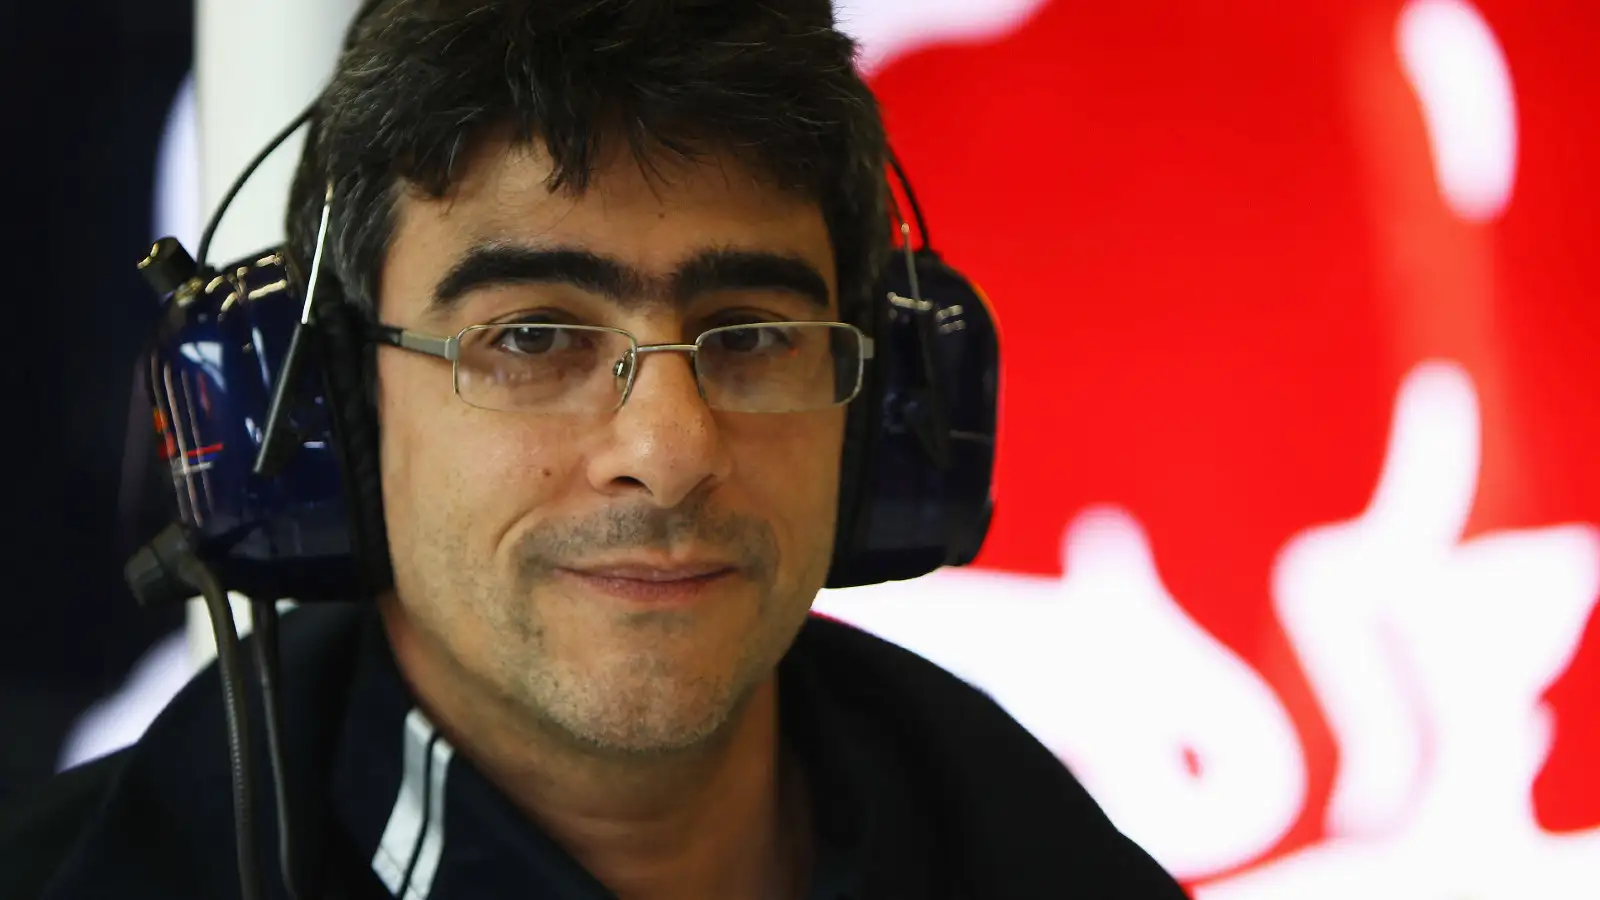 McLaren technical director, aerodynamics, Peter Prodromou during his time working with Red Bull.